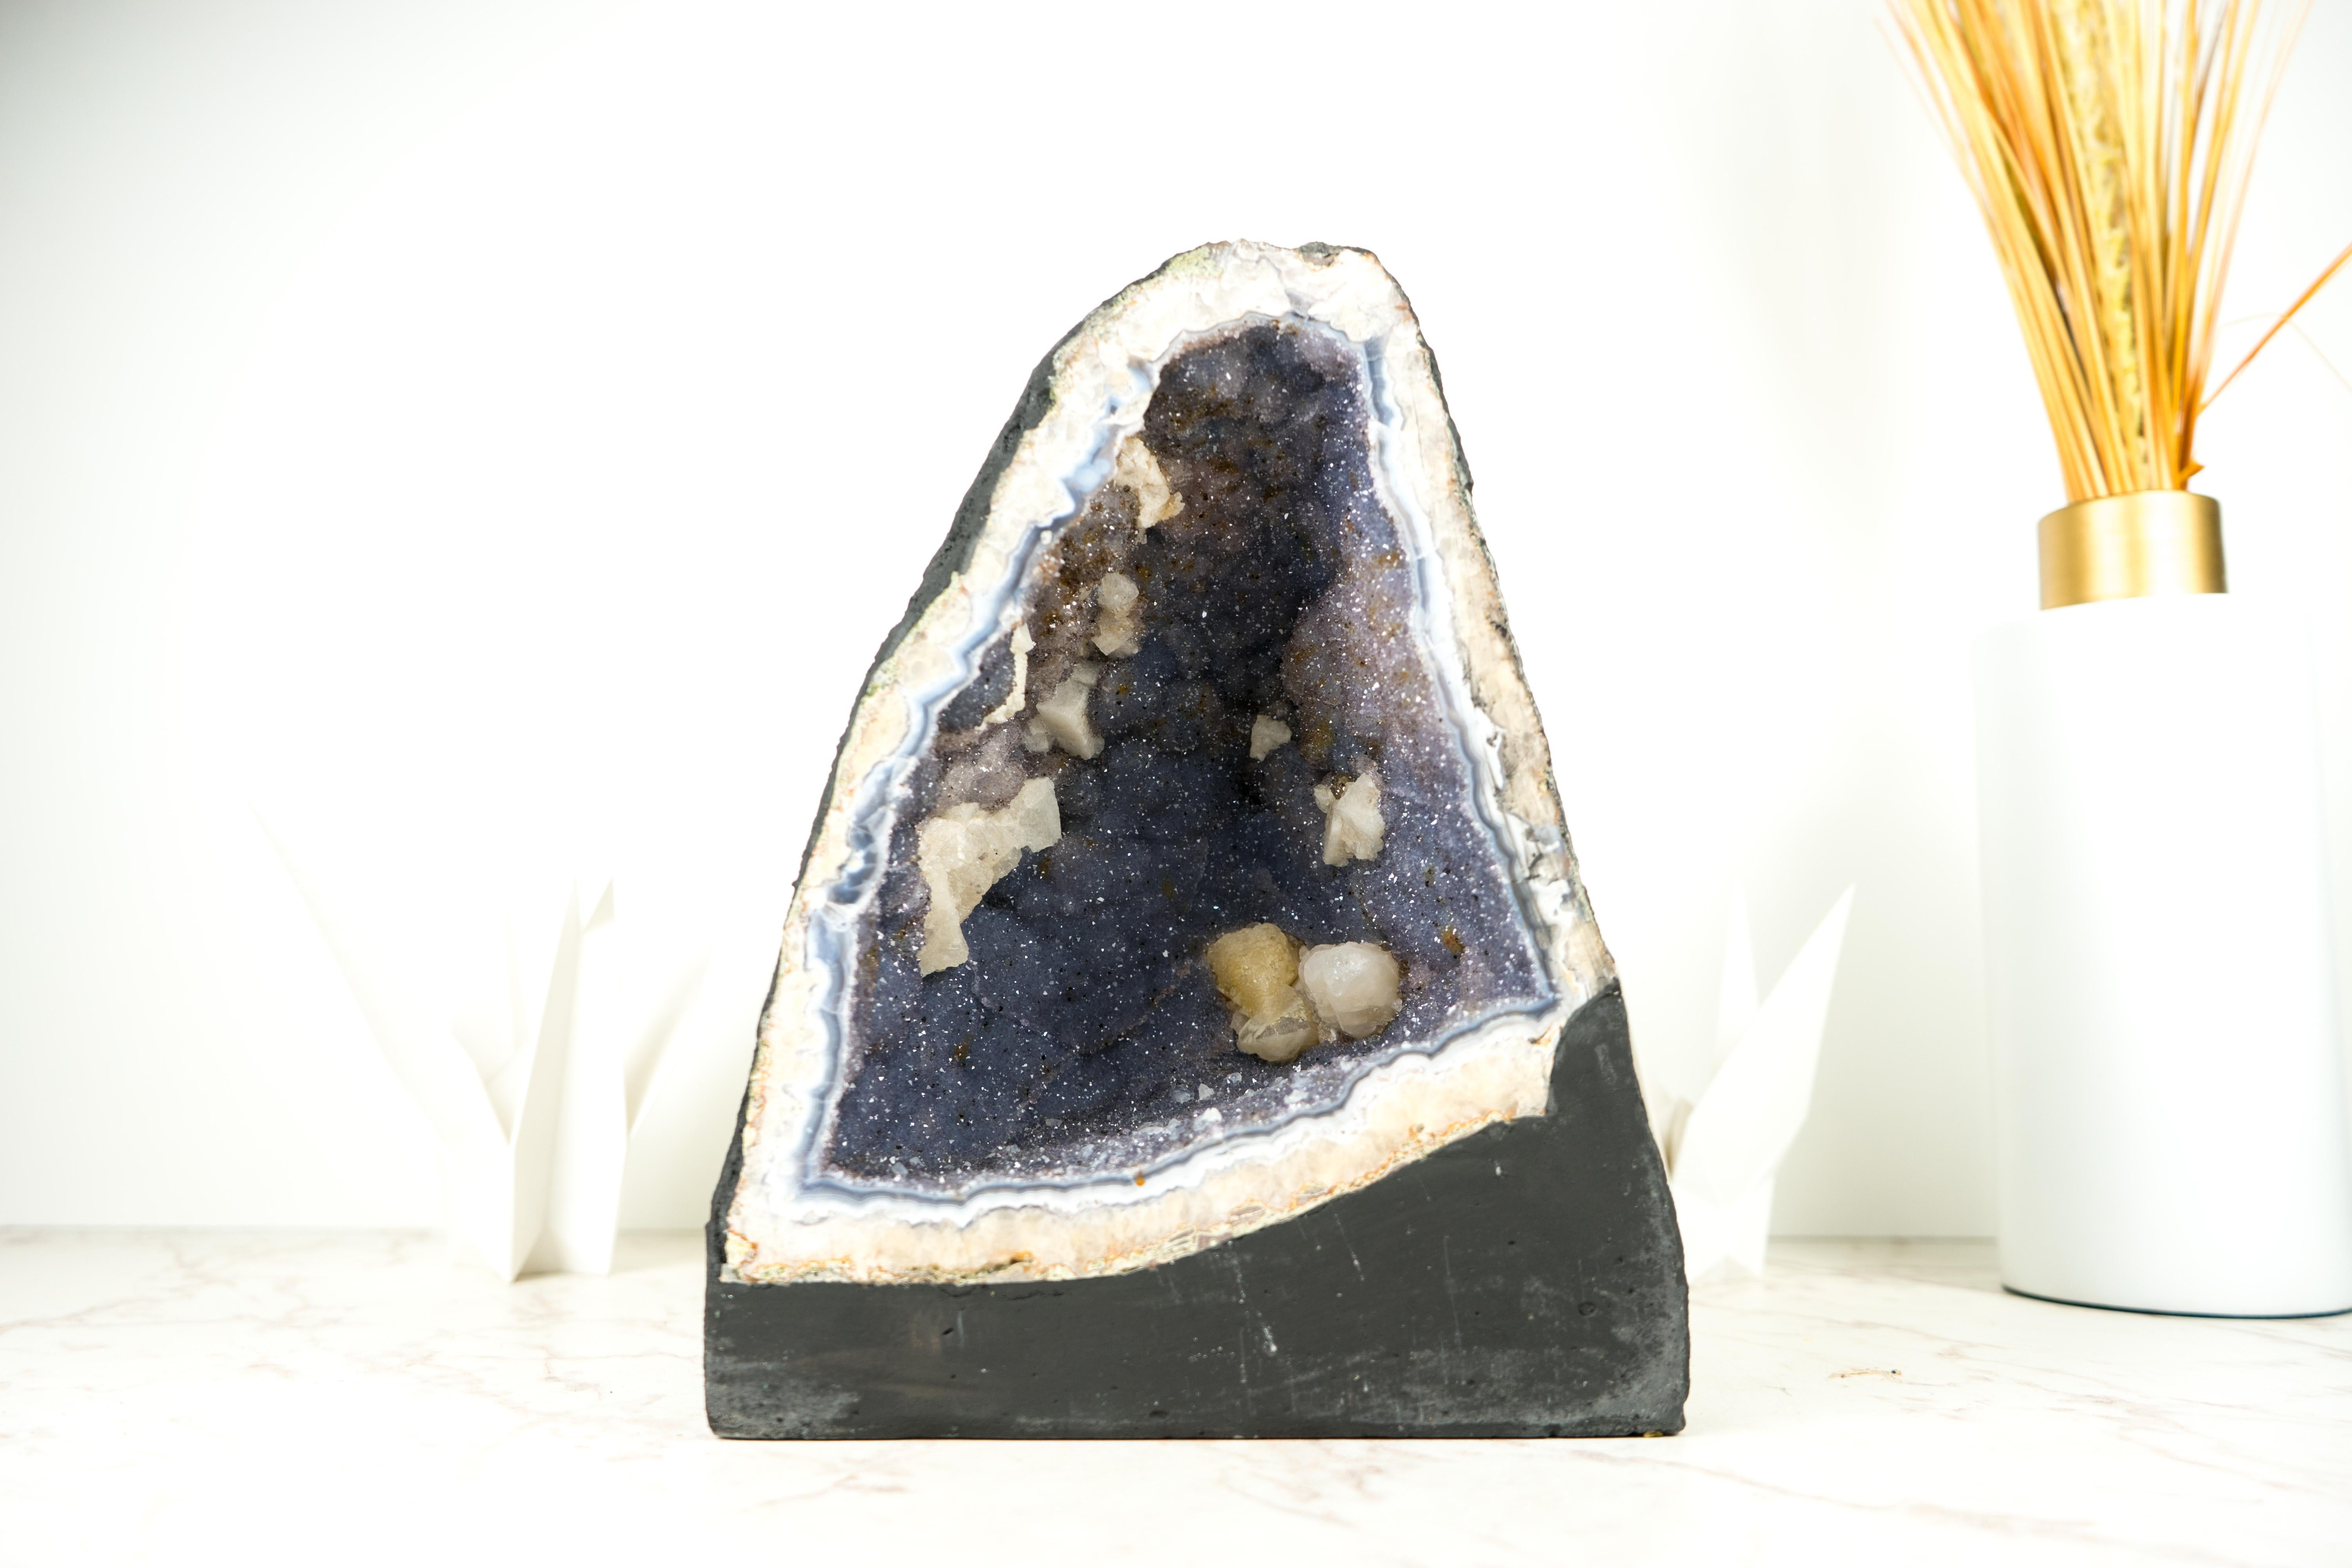 Pair of Blue Lace Agate Geodes with Lavender Amethyst Druzy, Rare Sparkly Geodes For Sale 8